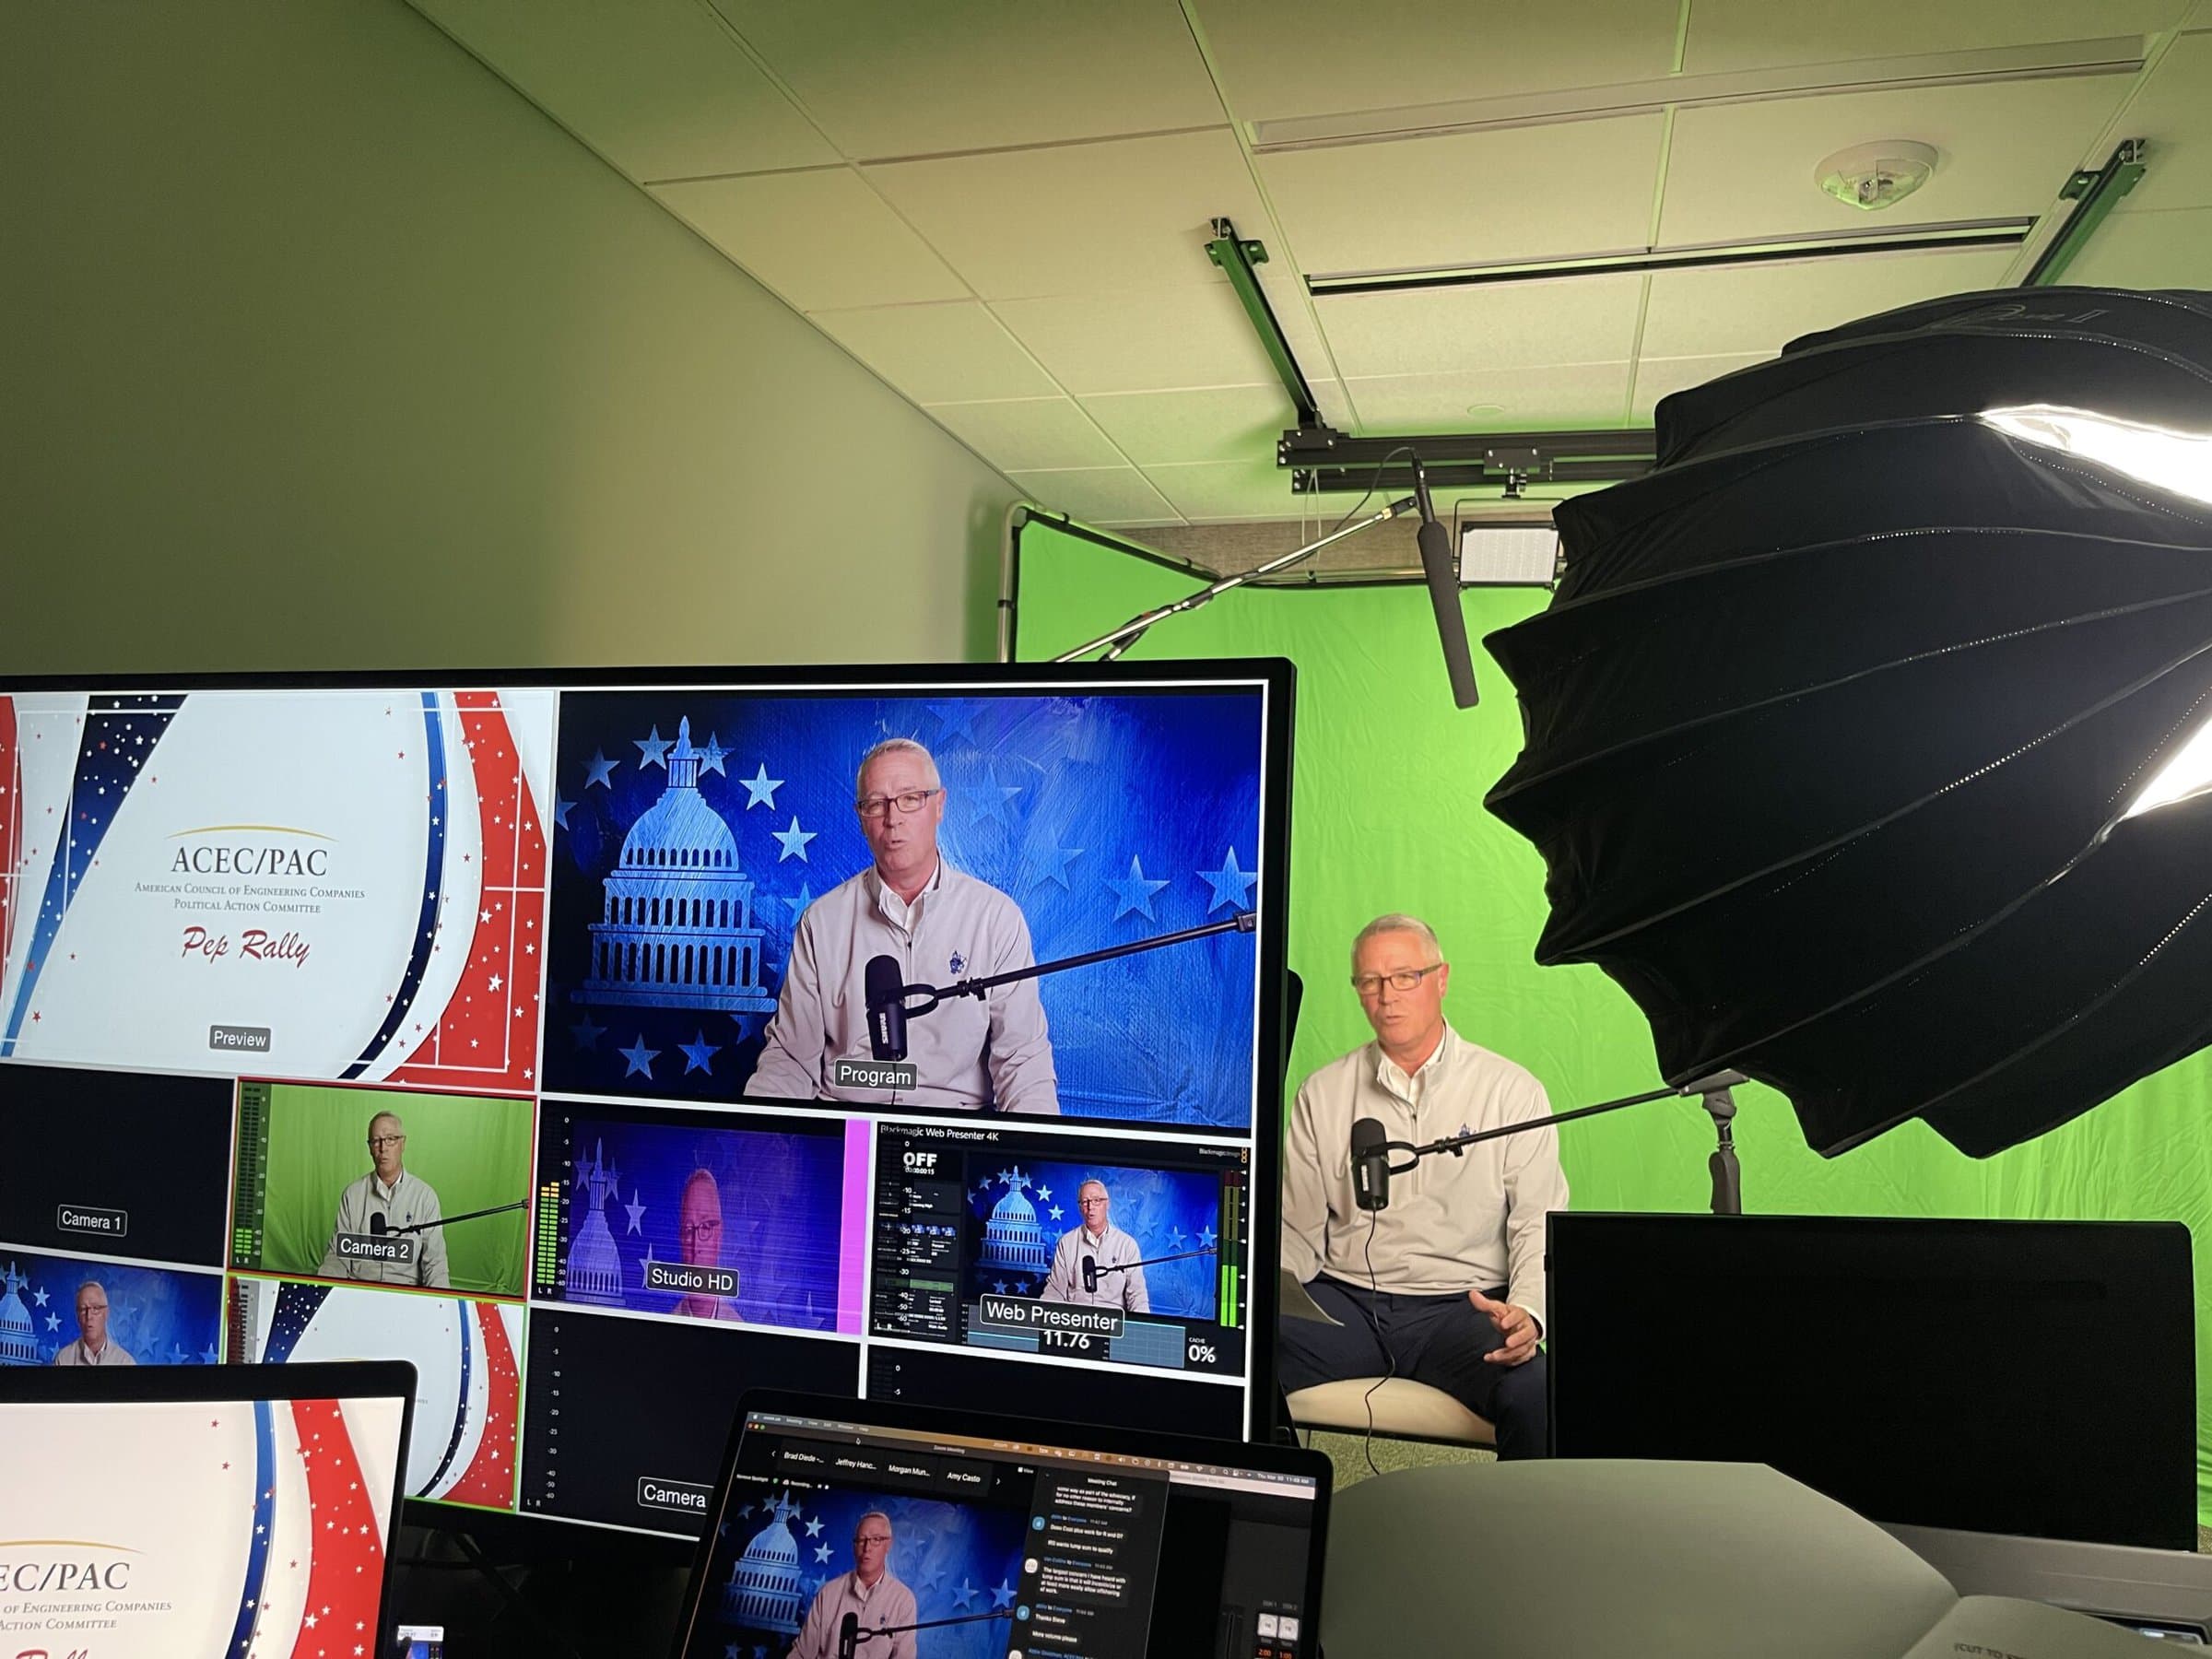 ACEC Member recording a video on green screen